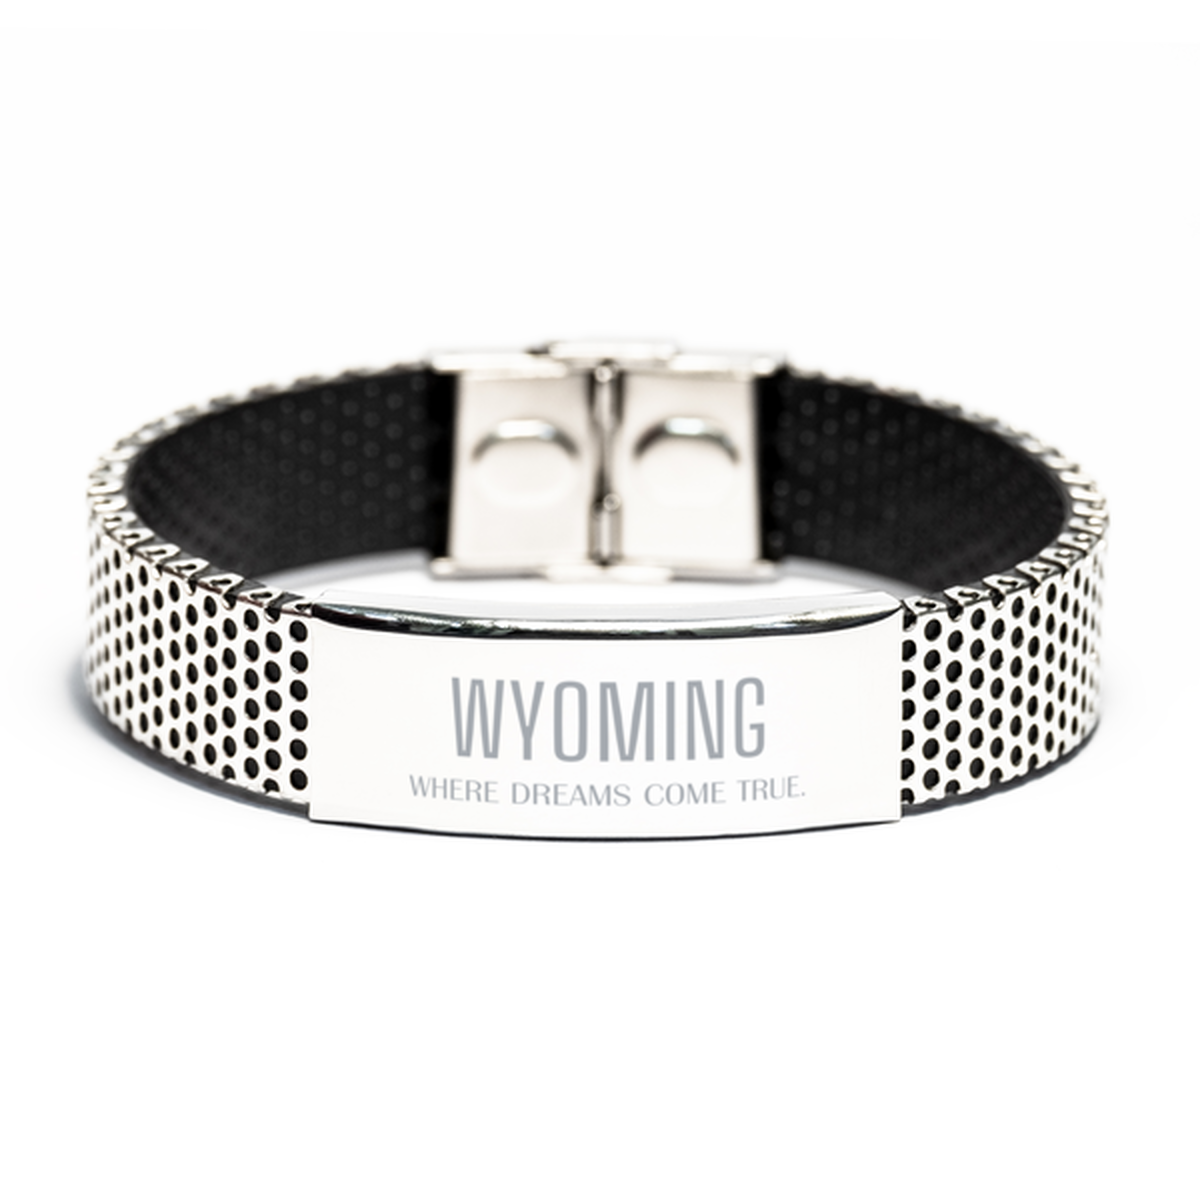 Love Wyoming State Stainless Steel Bracelet, Wyoming Where dreams come true, Birthday Inspirational Gifts For Wyoming Men, Women, Friends